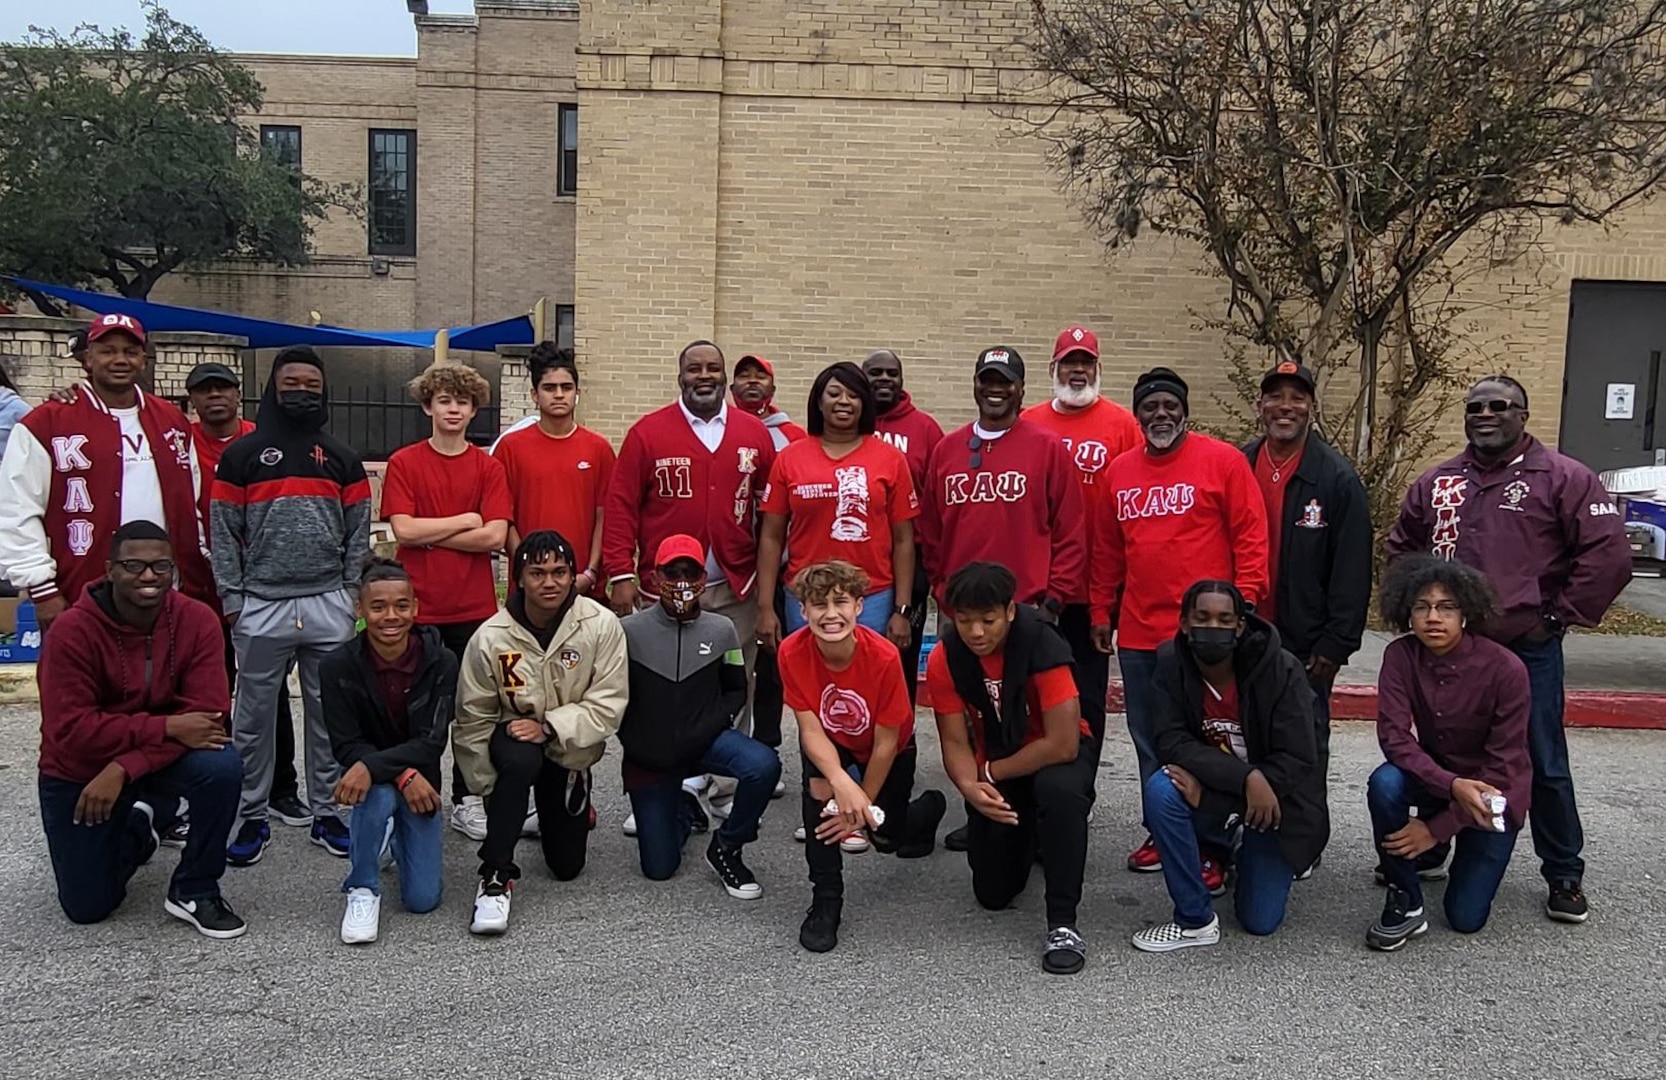 Group photo of Kappa League volunteers and youth in the program